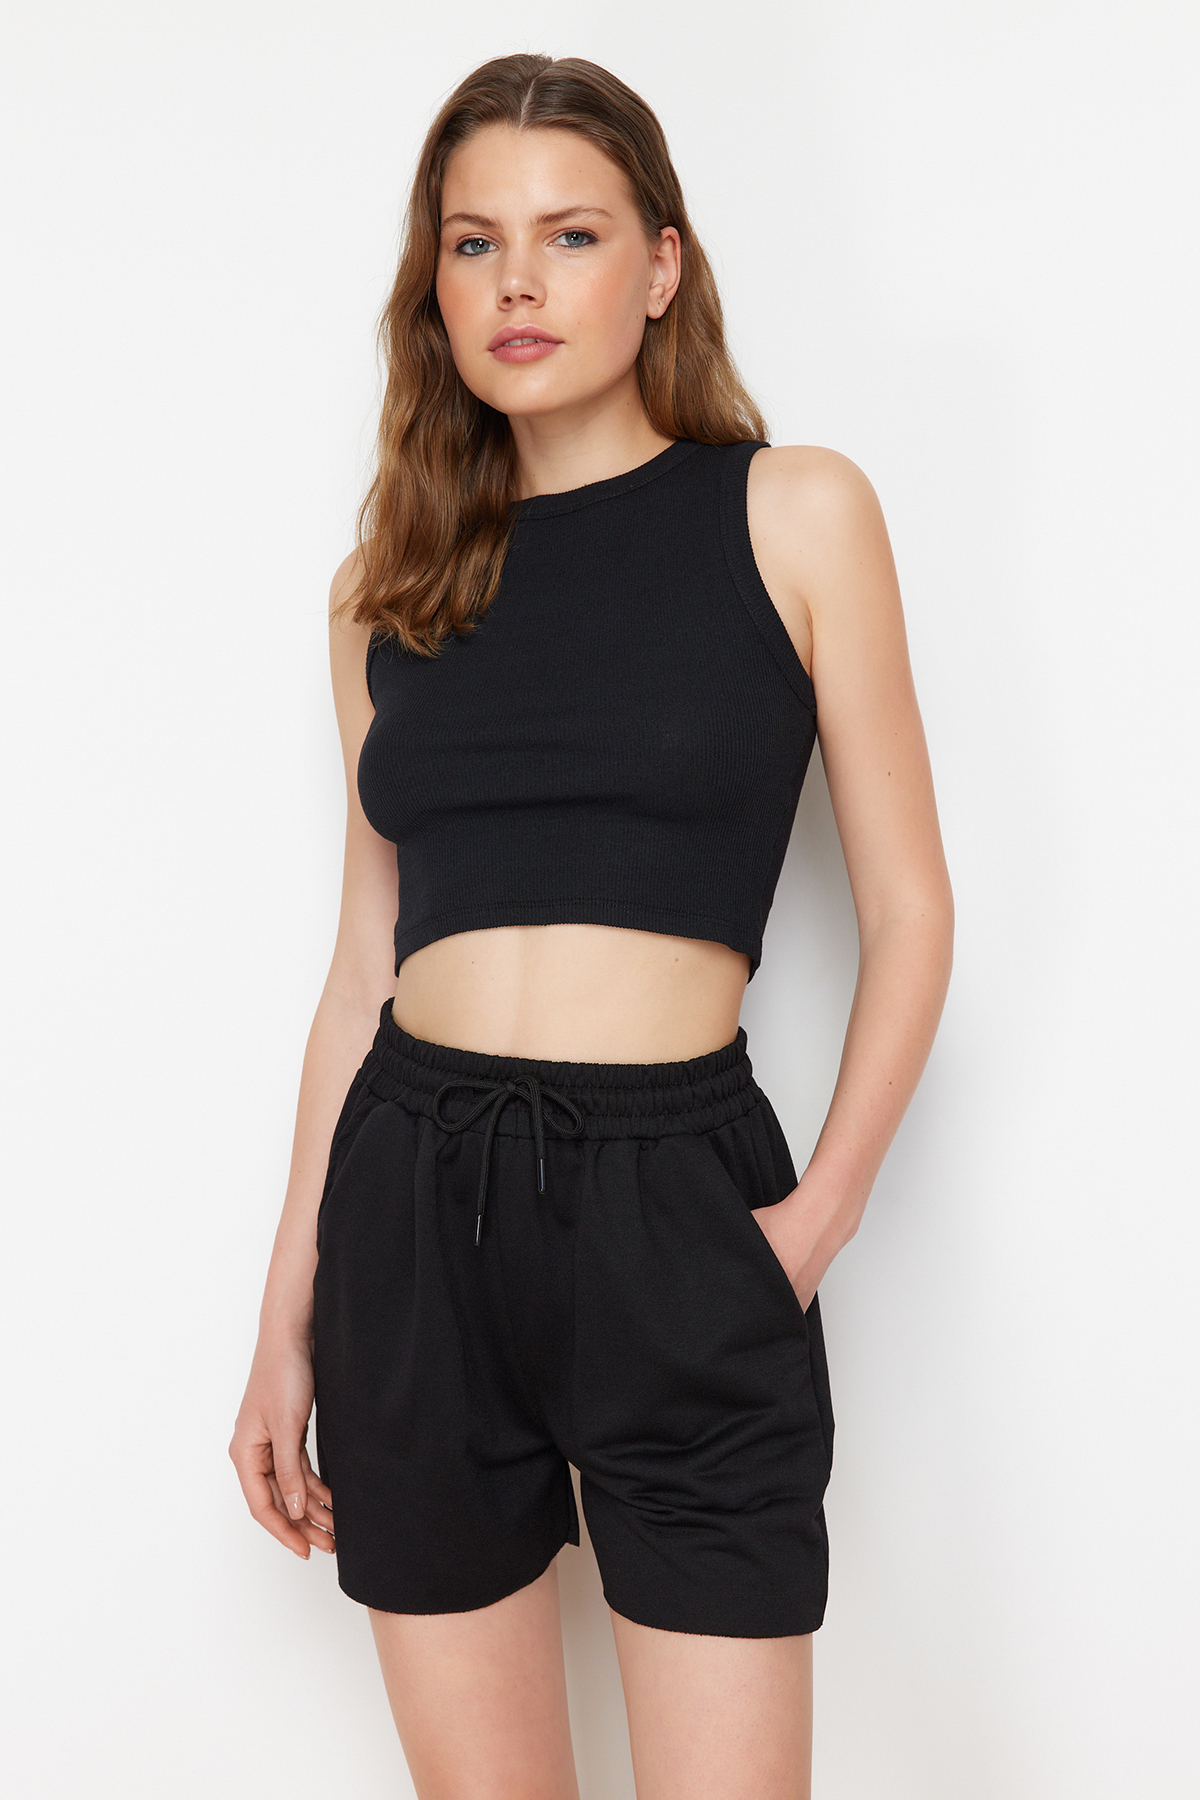 Trendyol Black Corduroy Tank and Shorts Flexible Knitted Top and Bottom Set